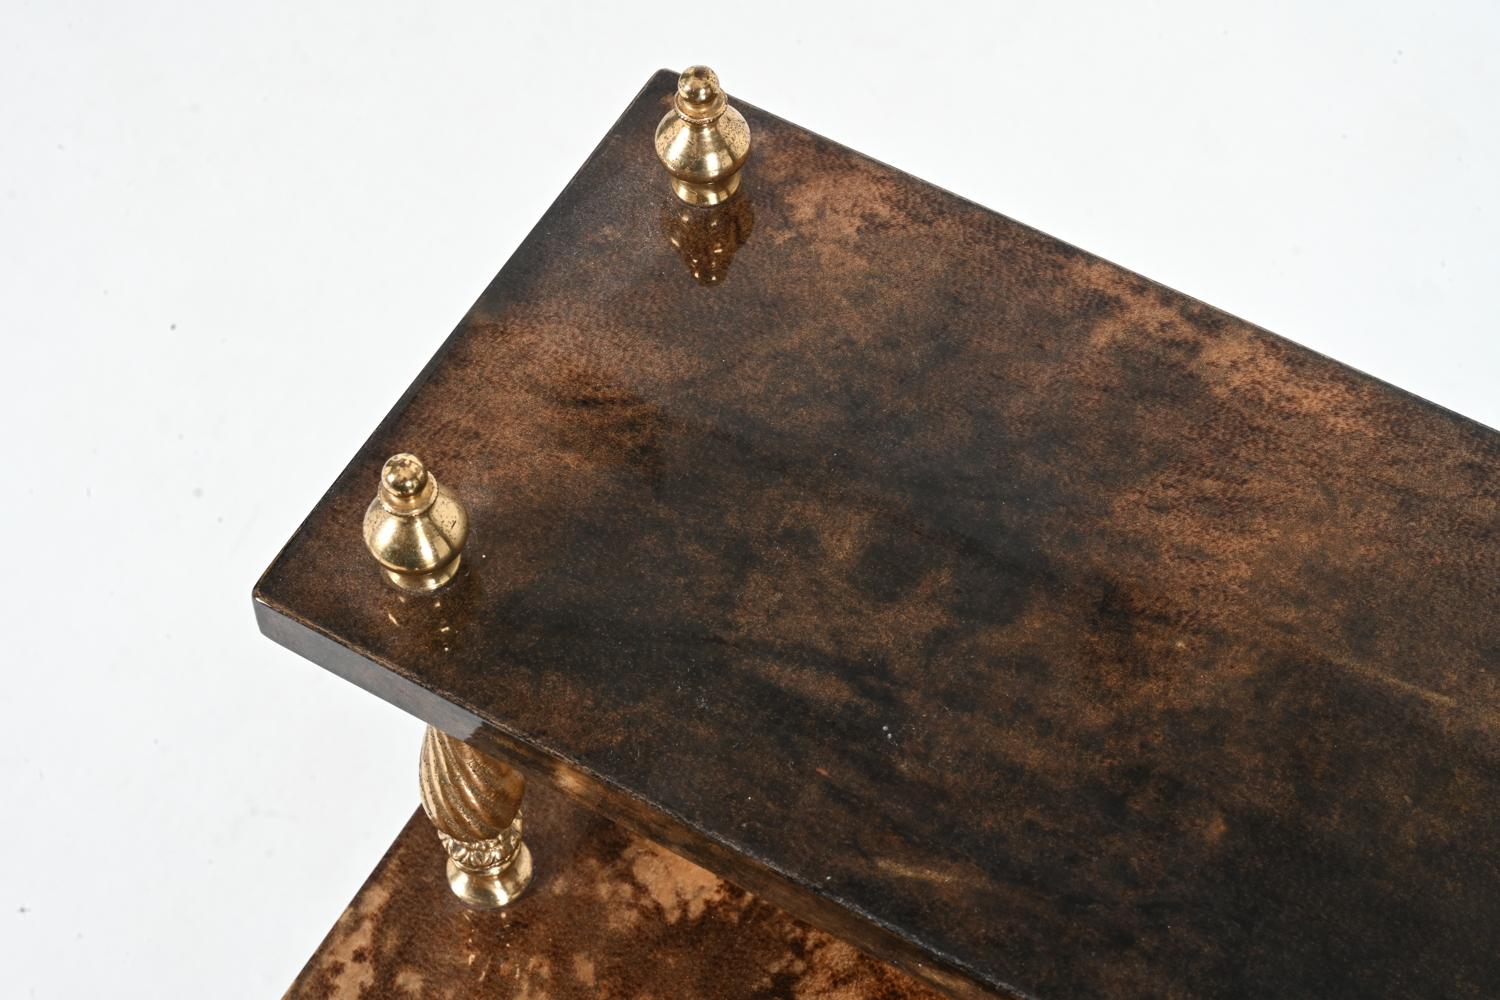 Aldo Tura Lacquered Goatskin & Brass Occasional Table, c. 1960's For Sale 1